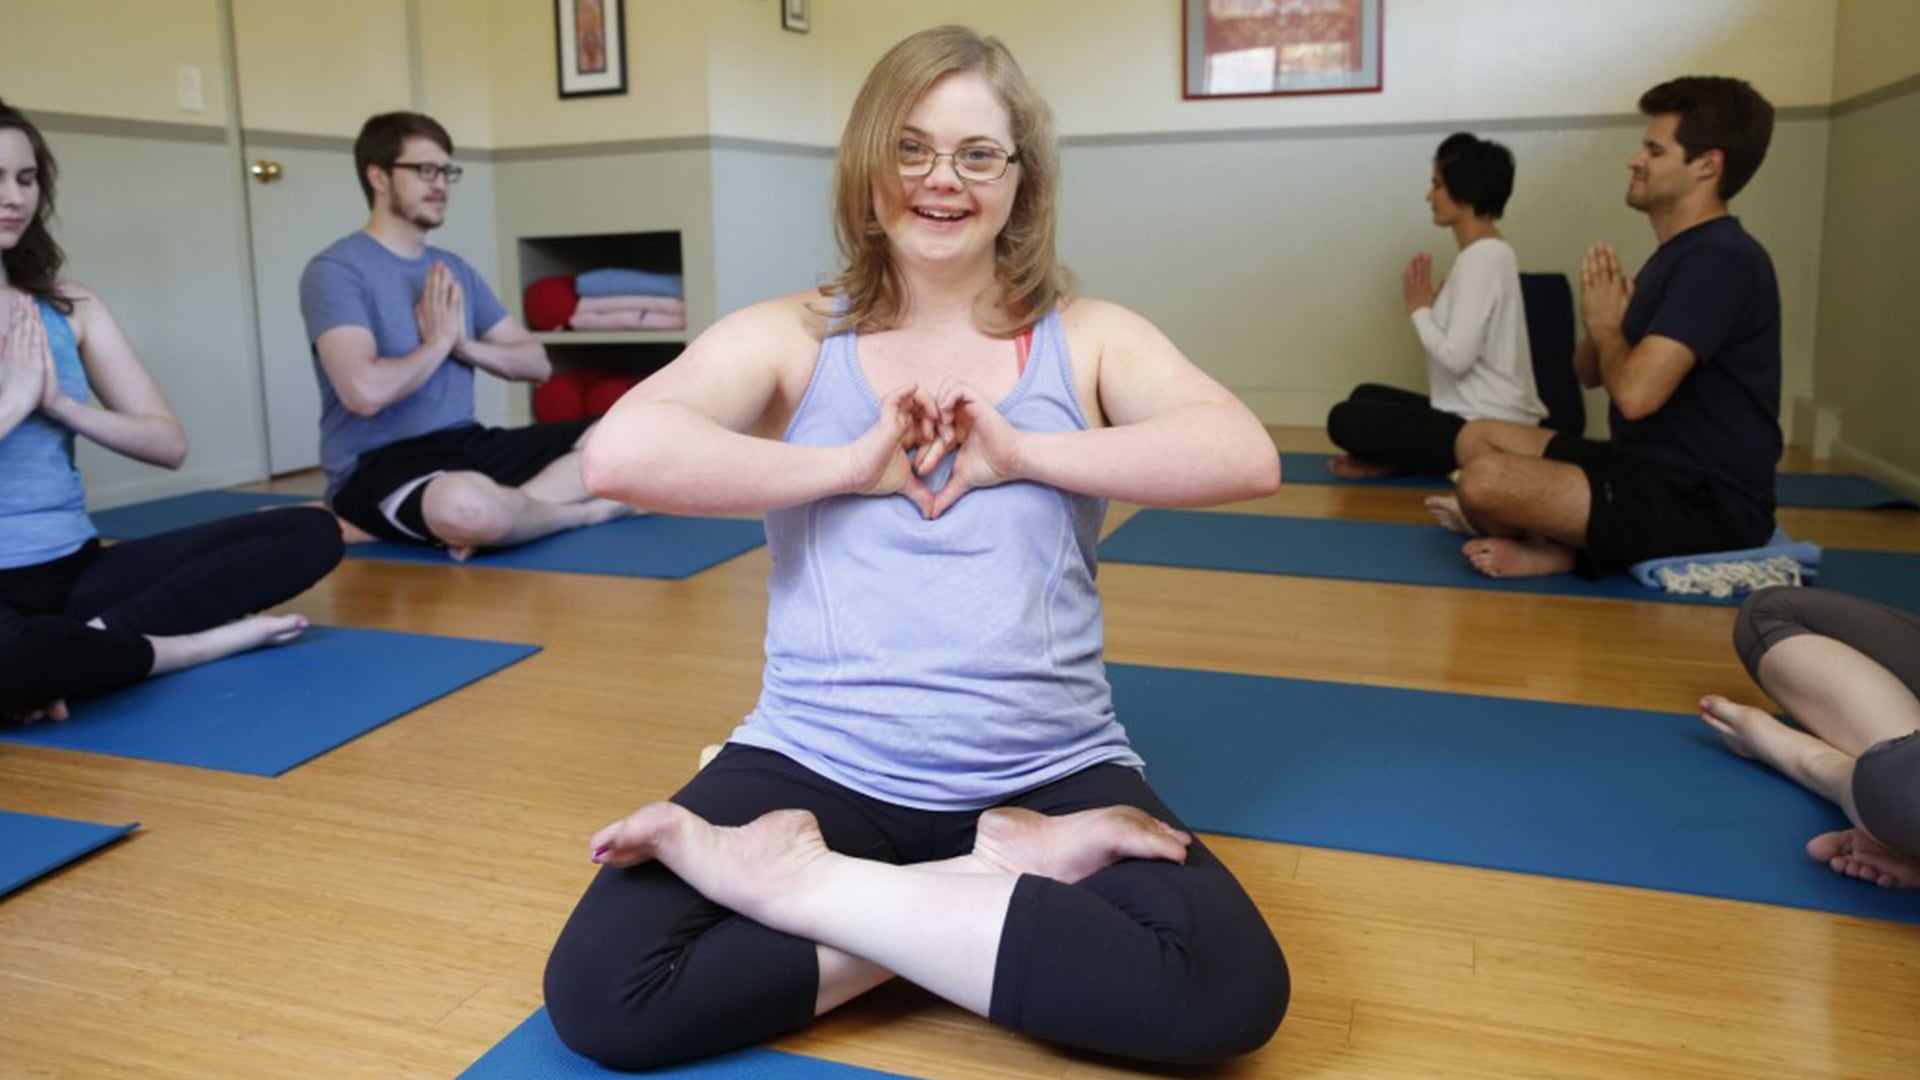 Meet the First Female Yoga Instructor With Down Syndrome